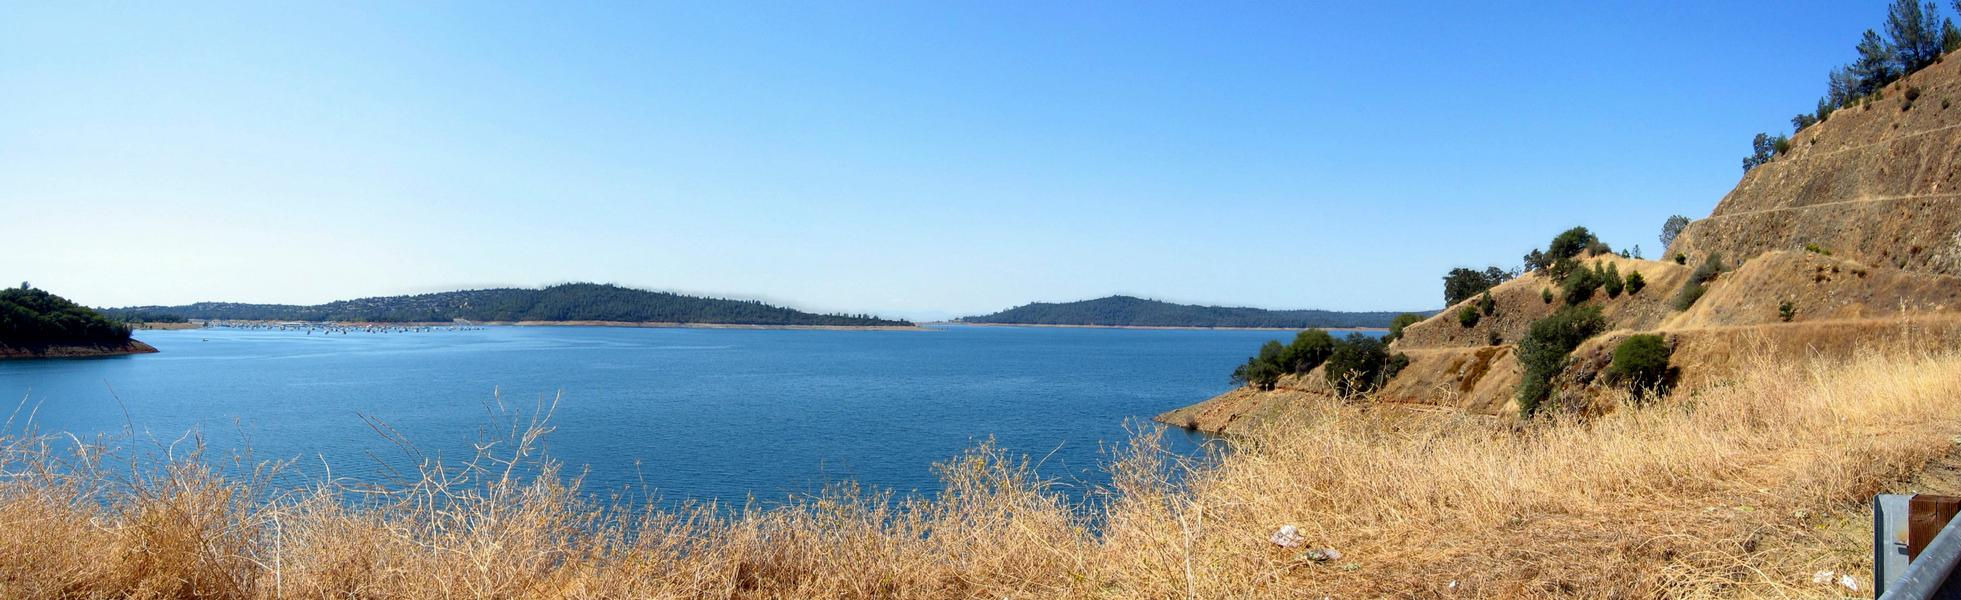 Blue waters meet blue skies with Oroville's peaceful view